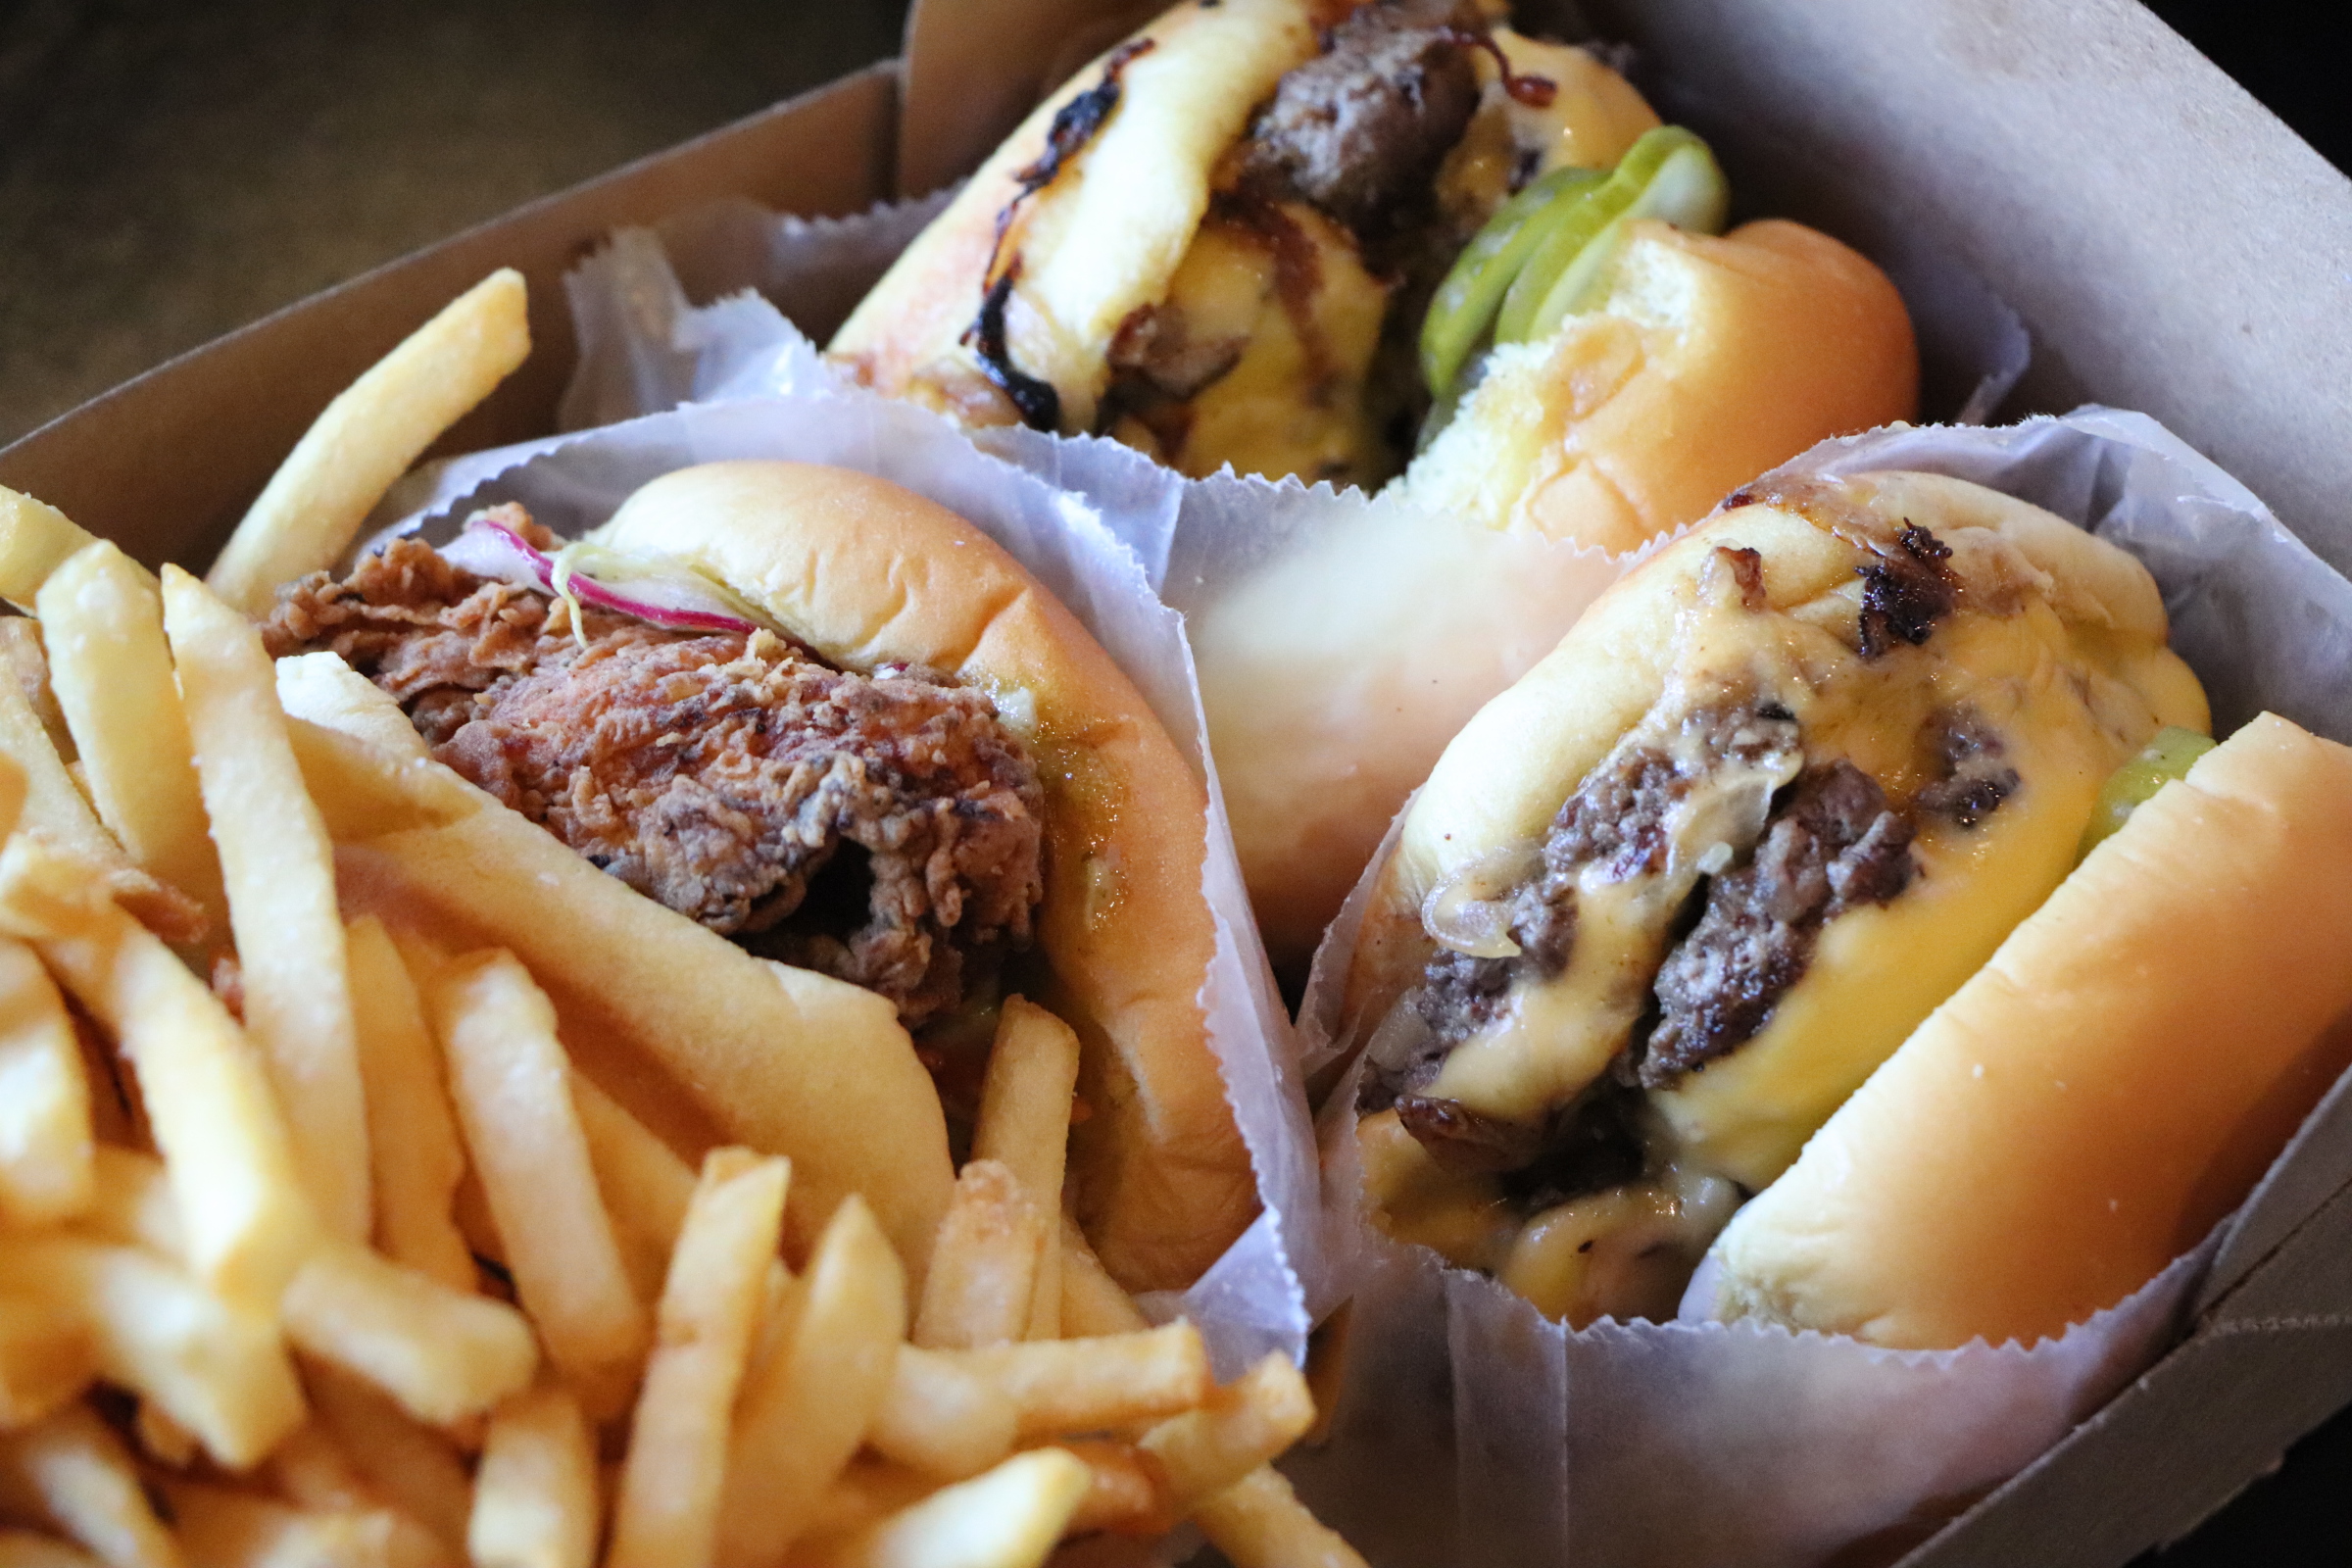 A close-up shot of two burgers, fries, and a fried chicken sandwich all in a paper bucket.